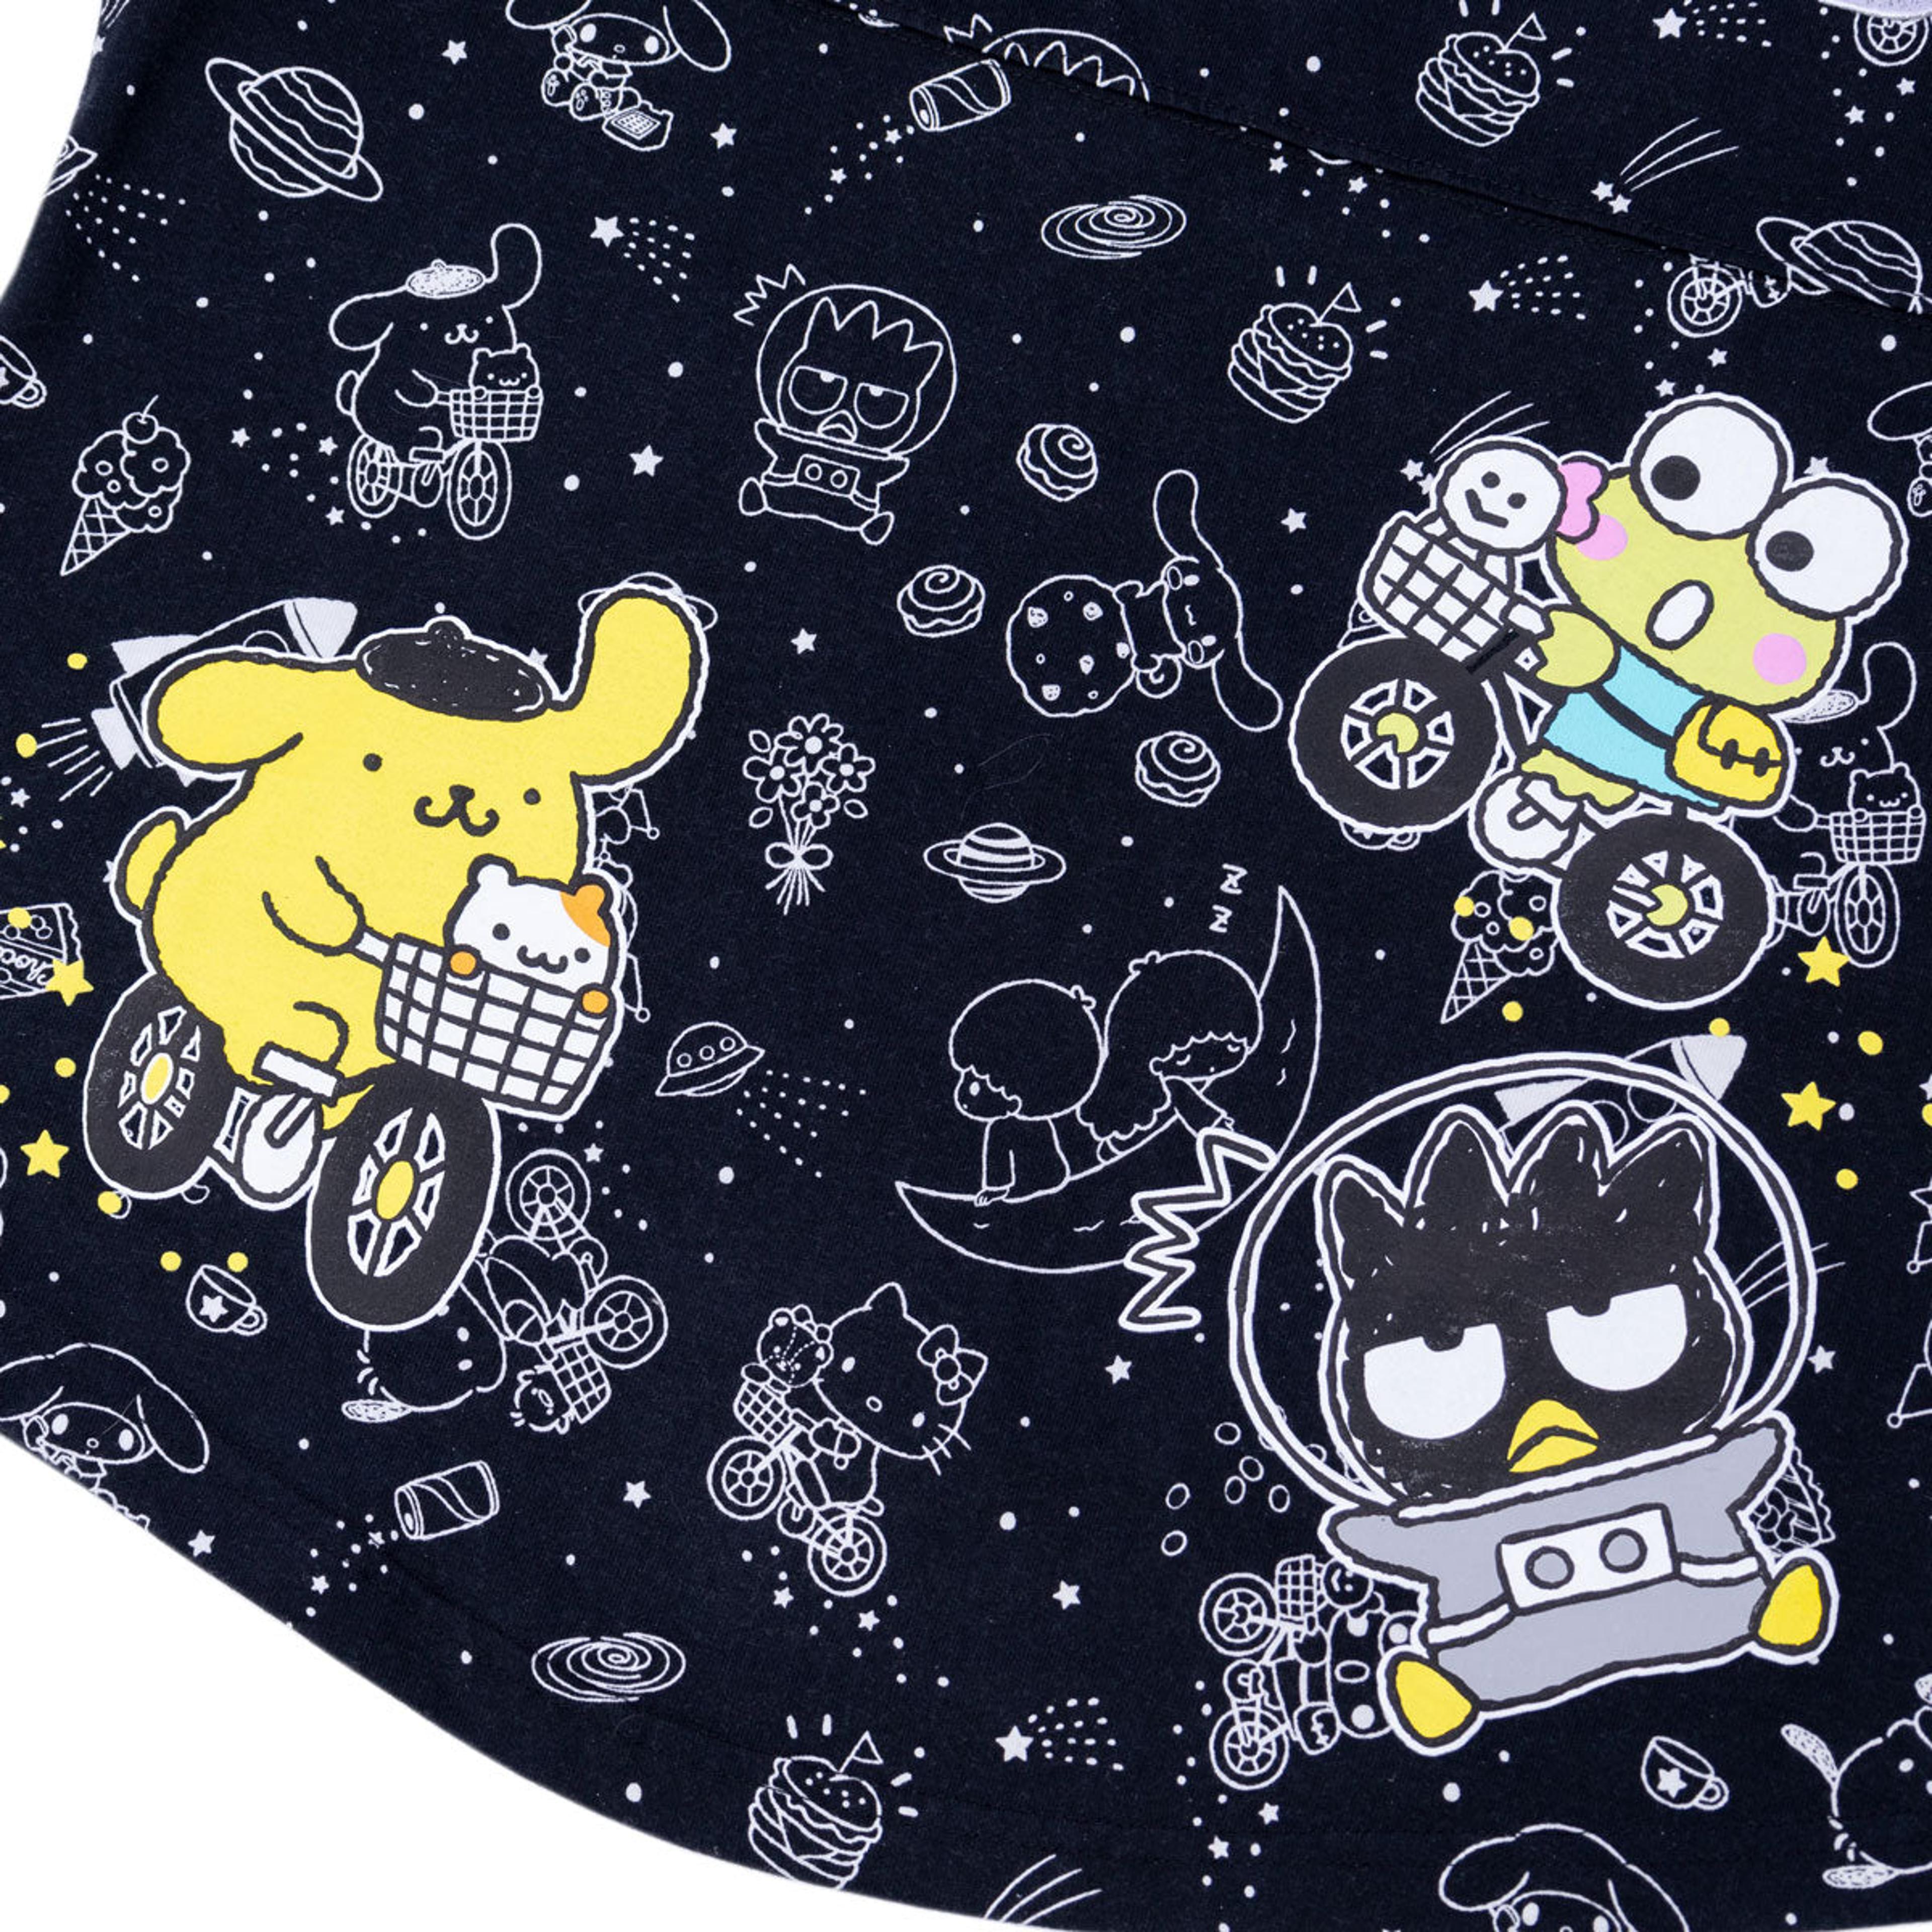 Alternate View 1 of Hello Kitty and Friends Space JapanLA Spirit Jersey